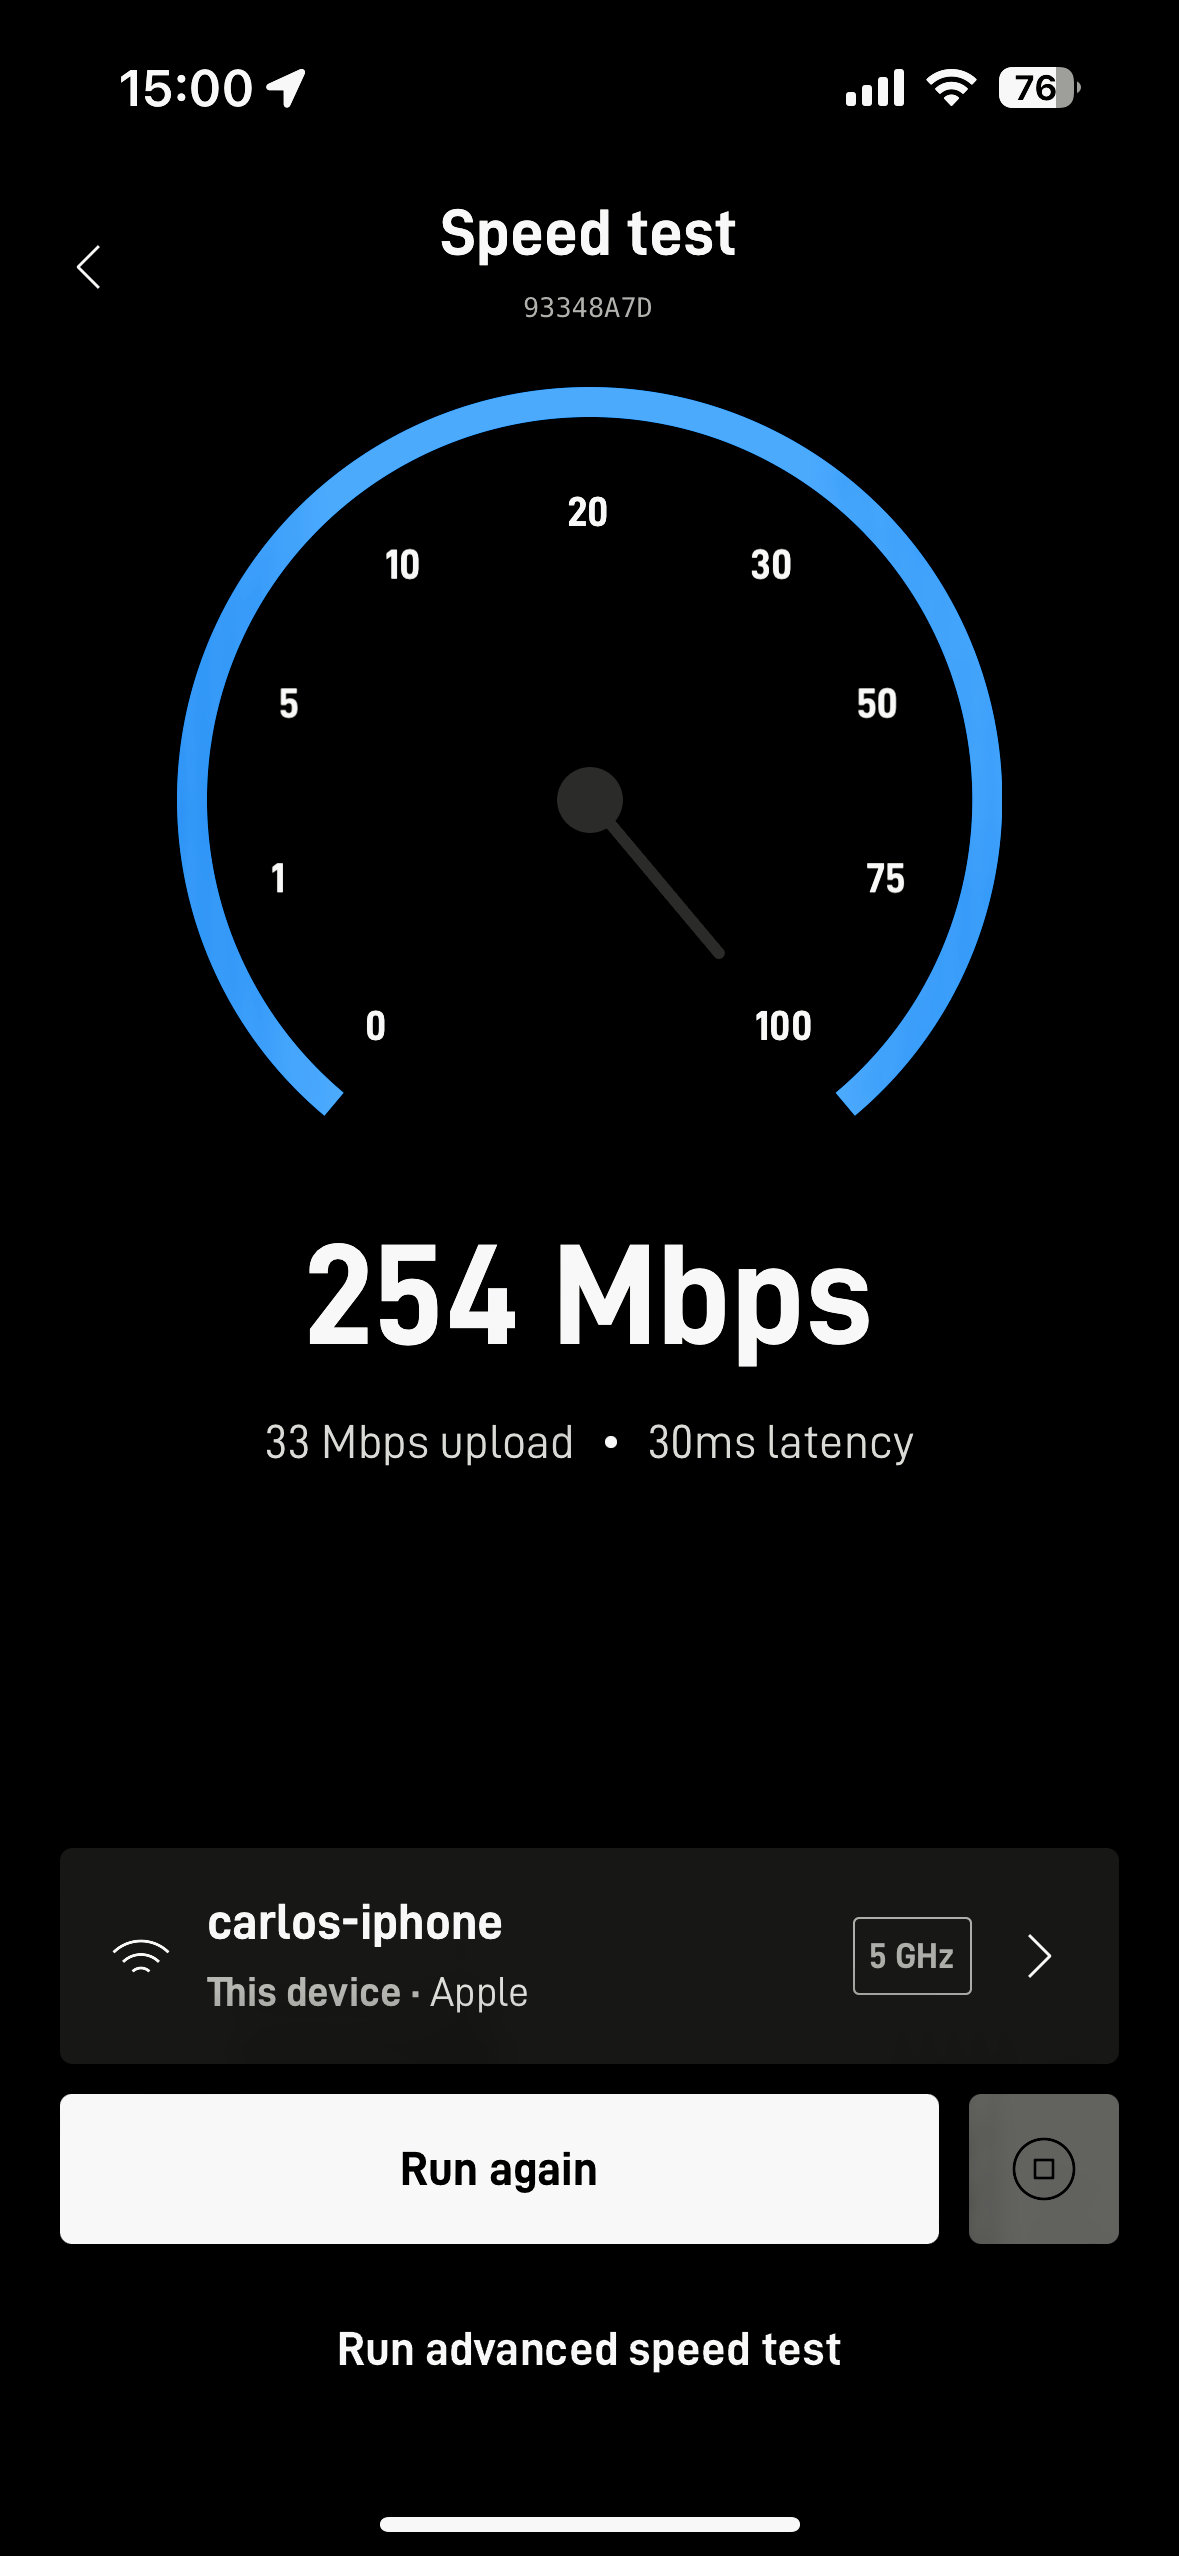 Speed tests from Starlink.